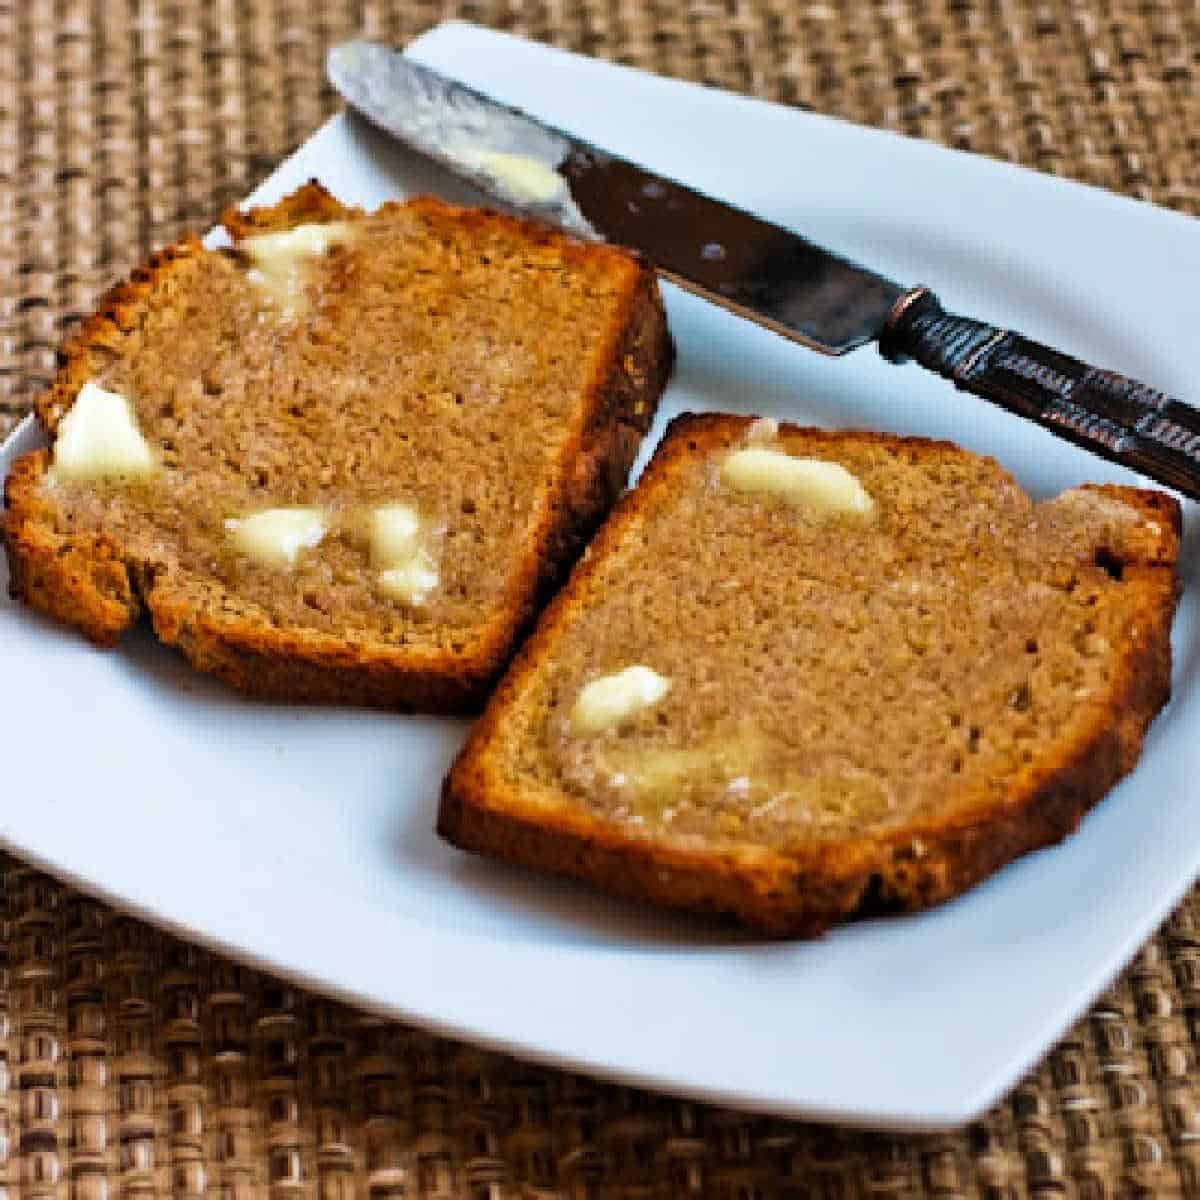 Square image of Brown Irish Soda Bread on plate with knife and butter.